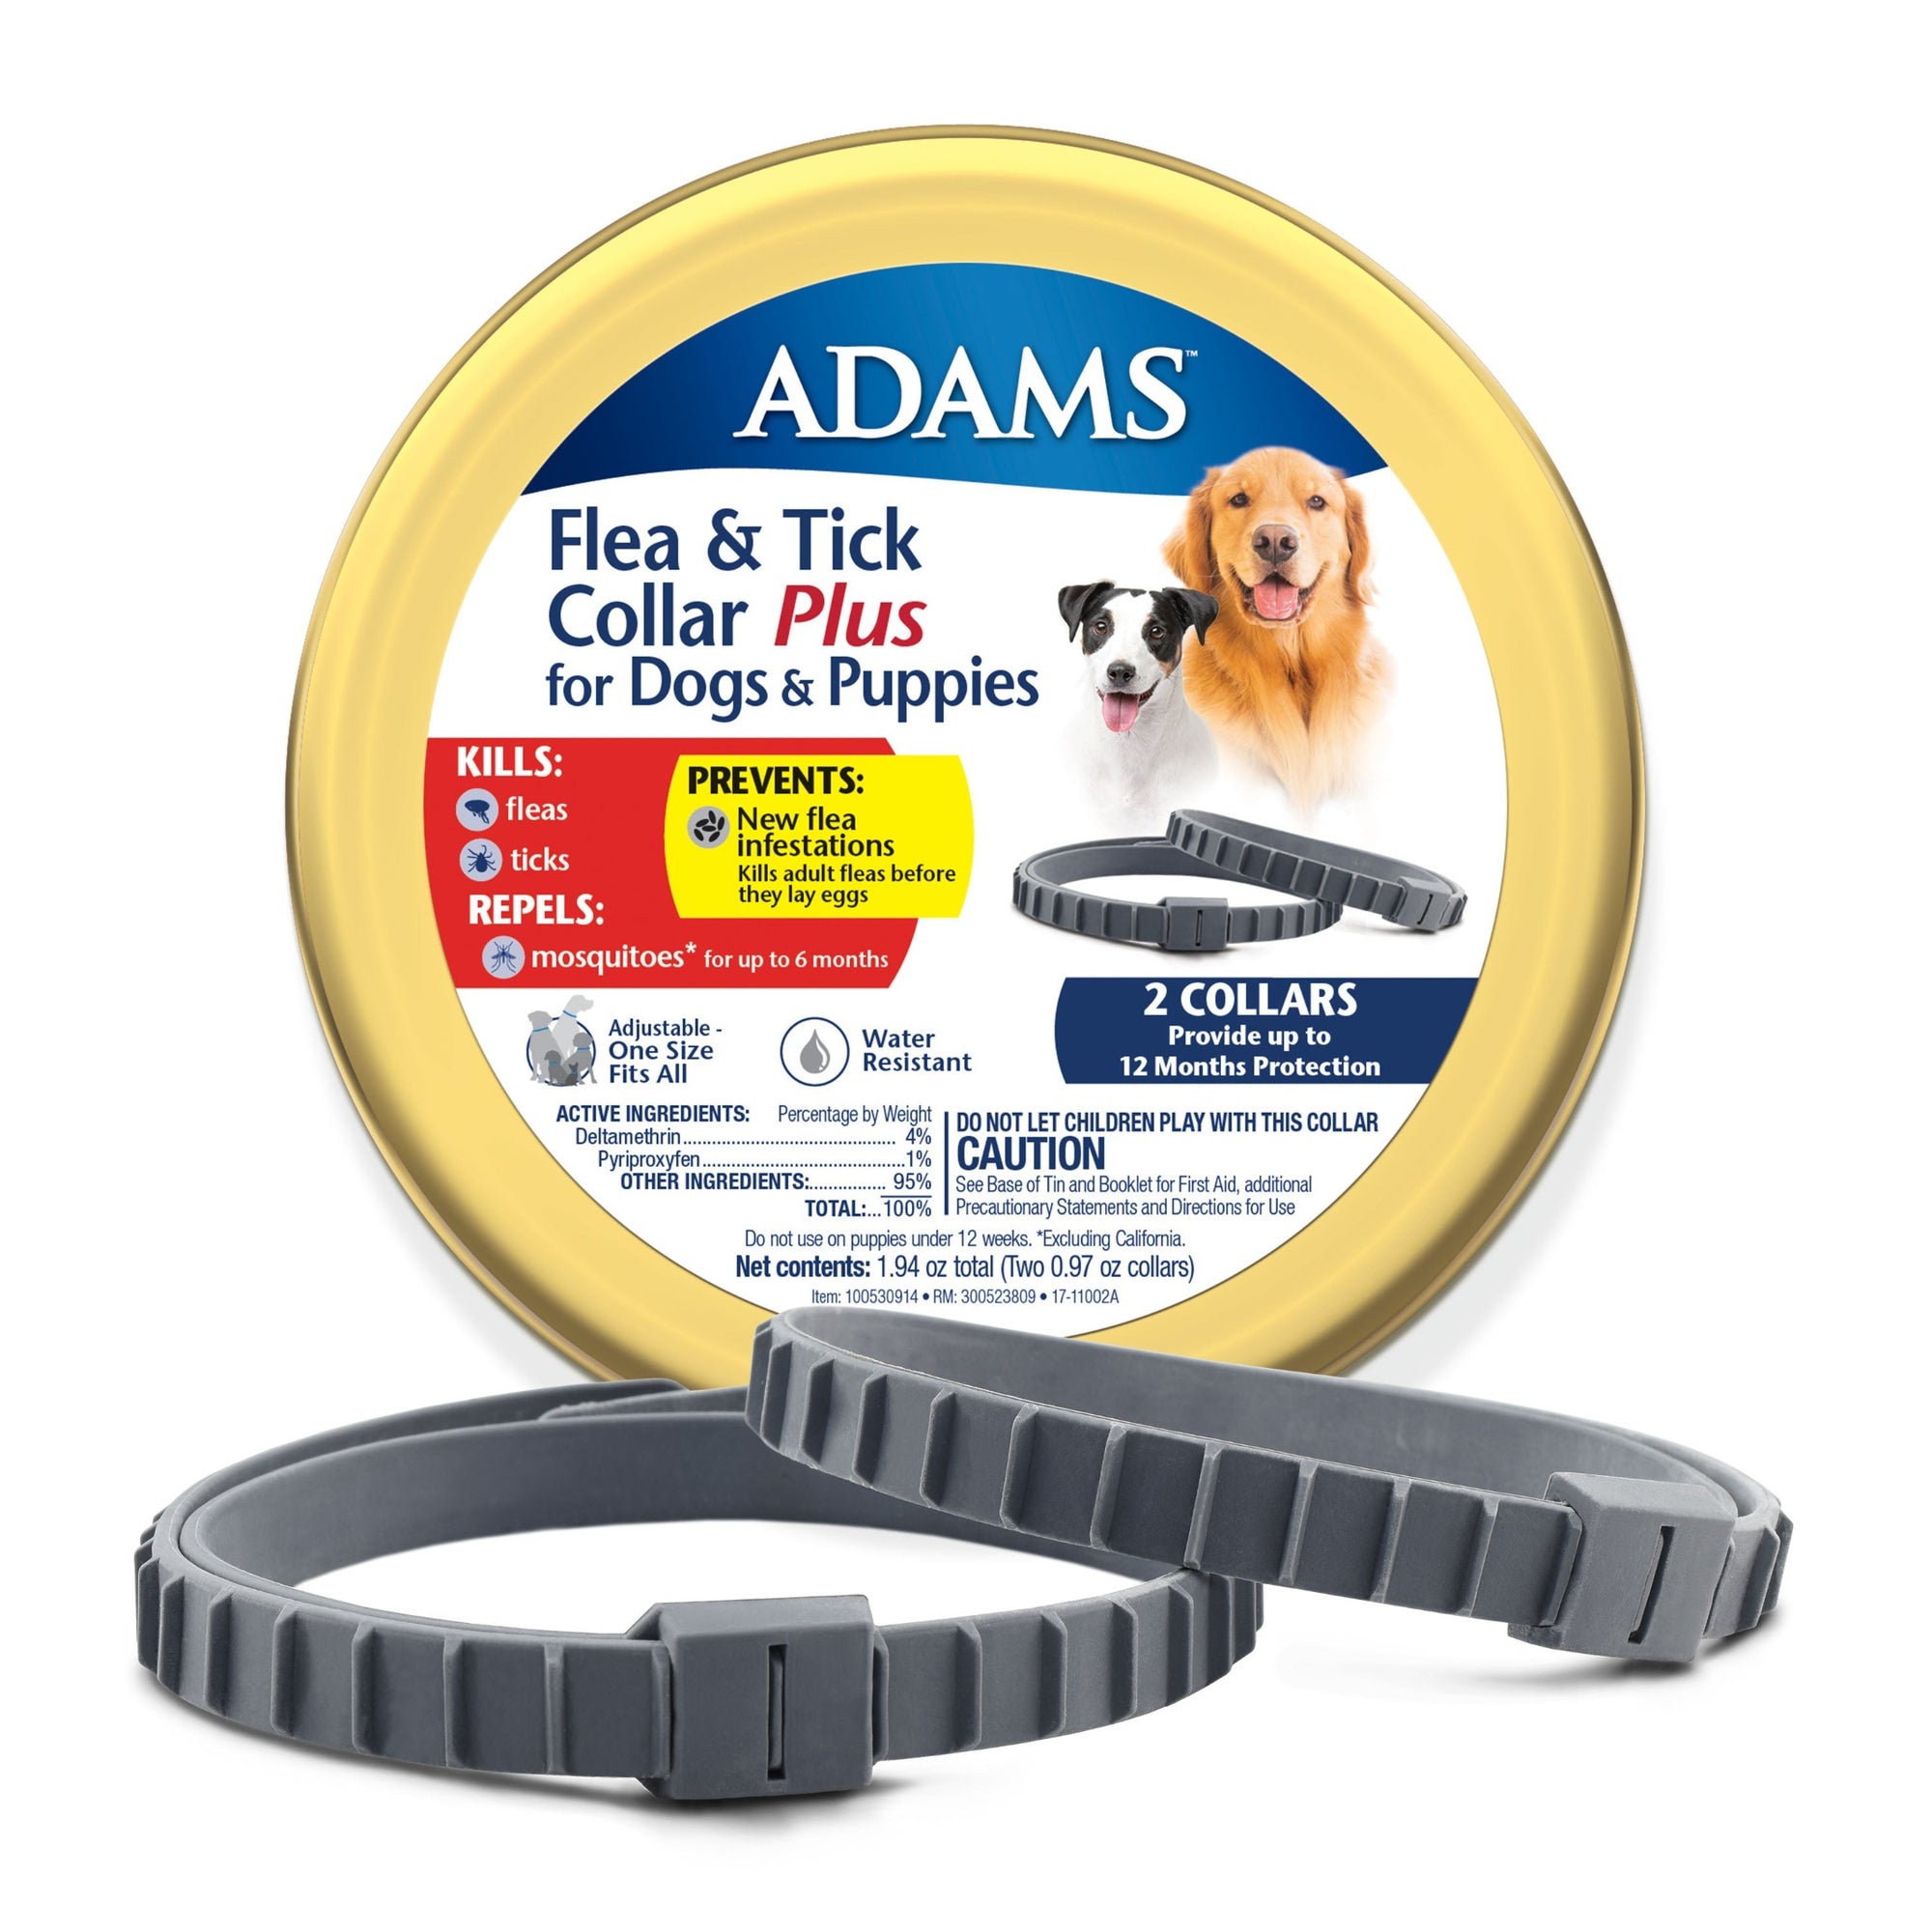 Adams Flea and Tick Collar Plus for Dogs and Puppies